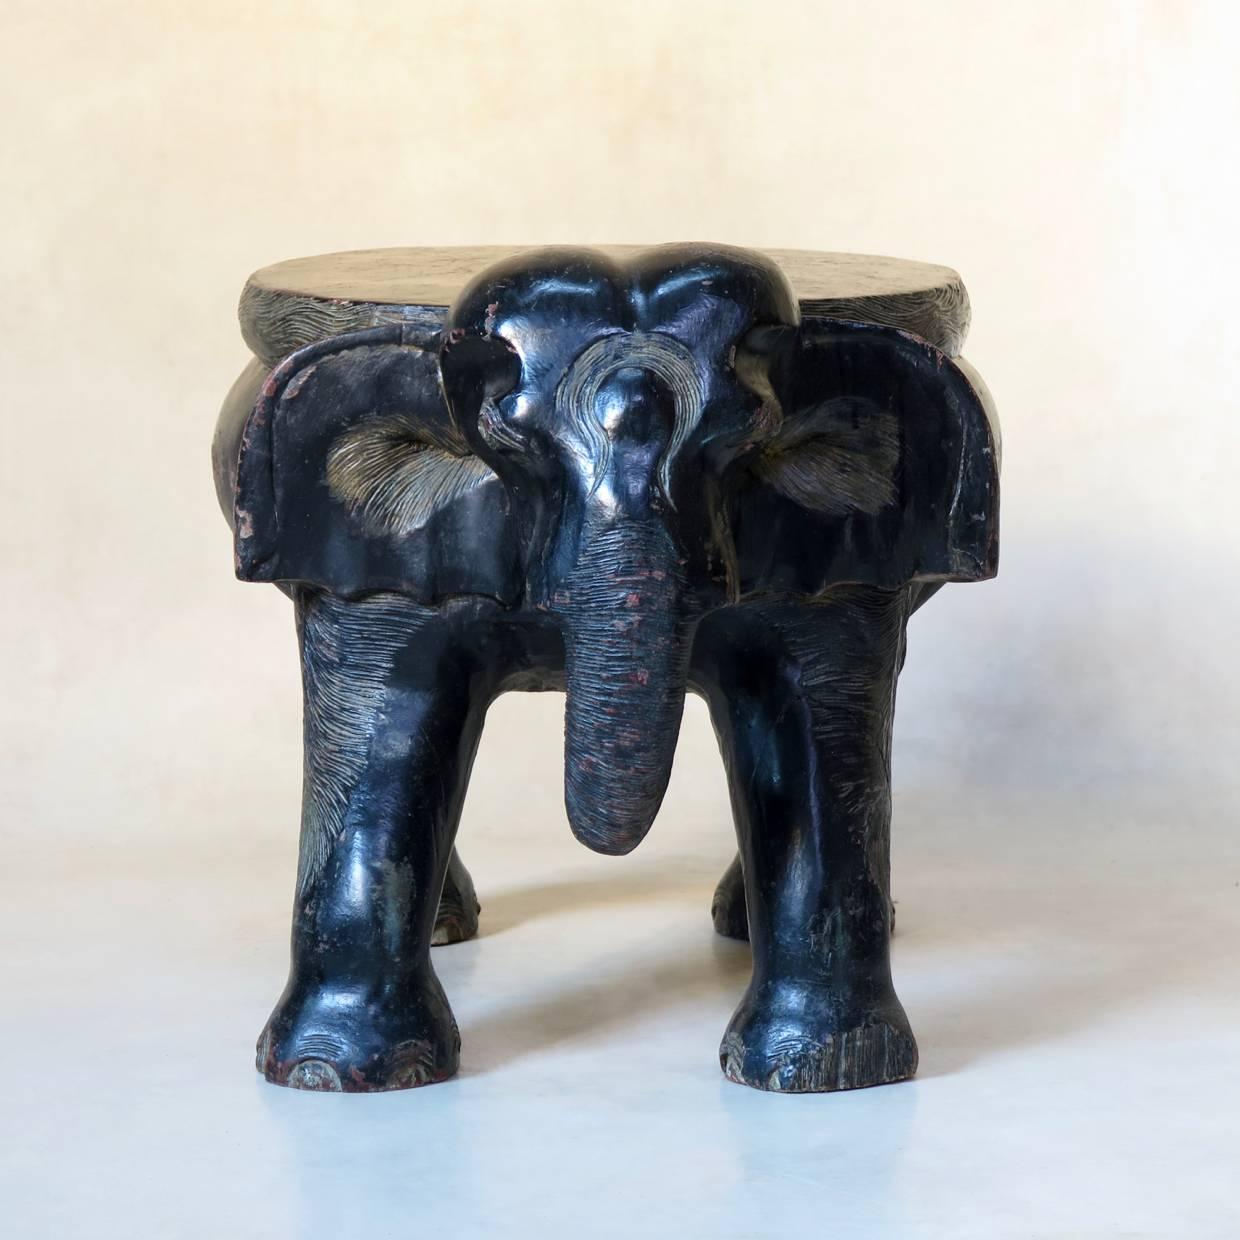 Heavy and pleasantly rotund elephant-shaped stool / side table, made from a dense, exotic wood with a nicely patinated ebonized finish.